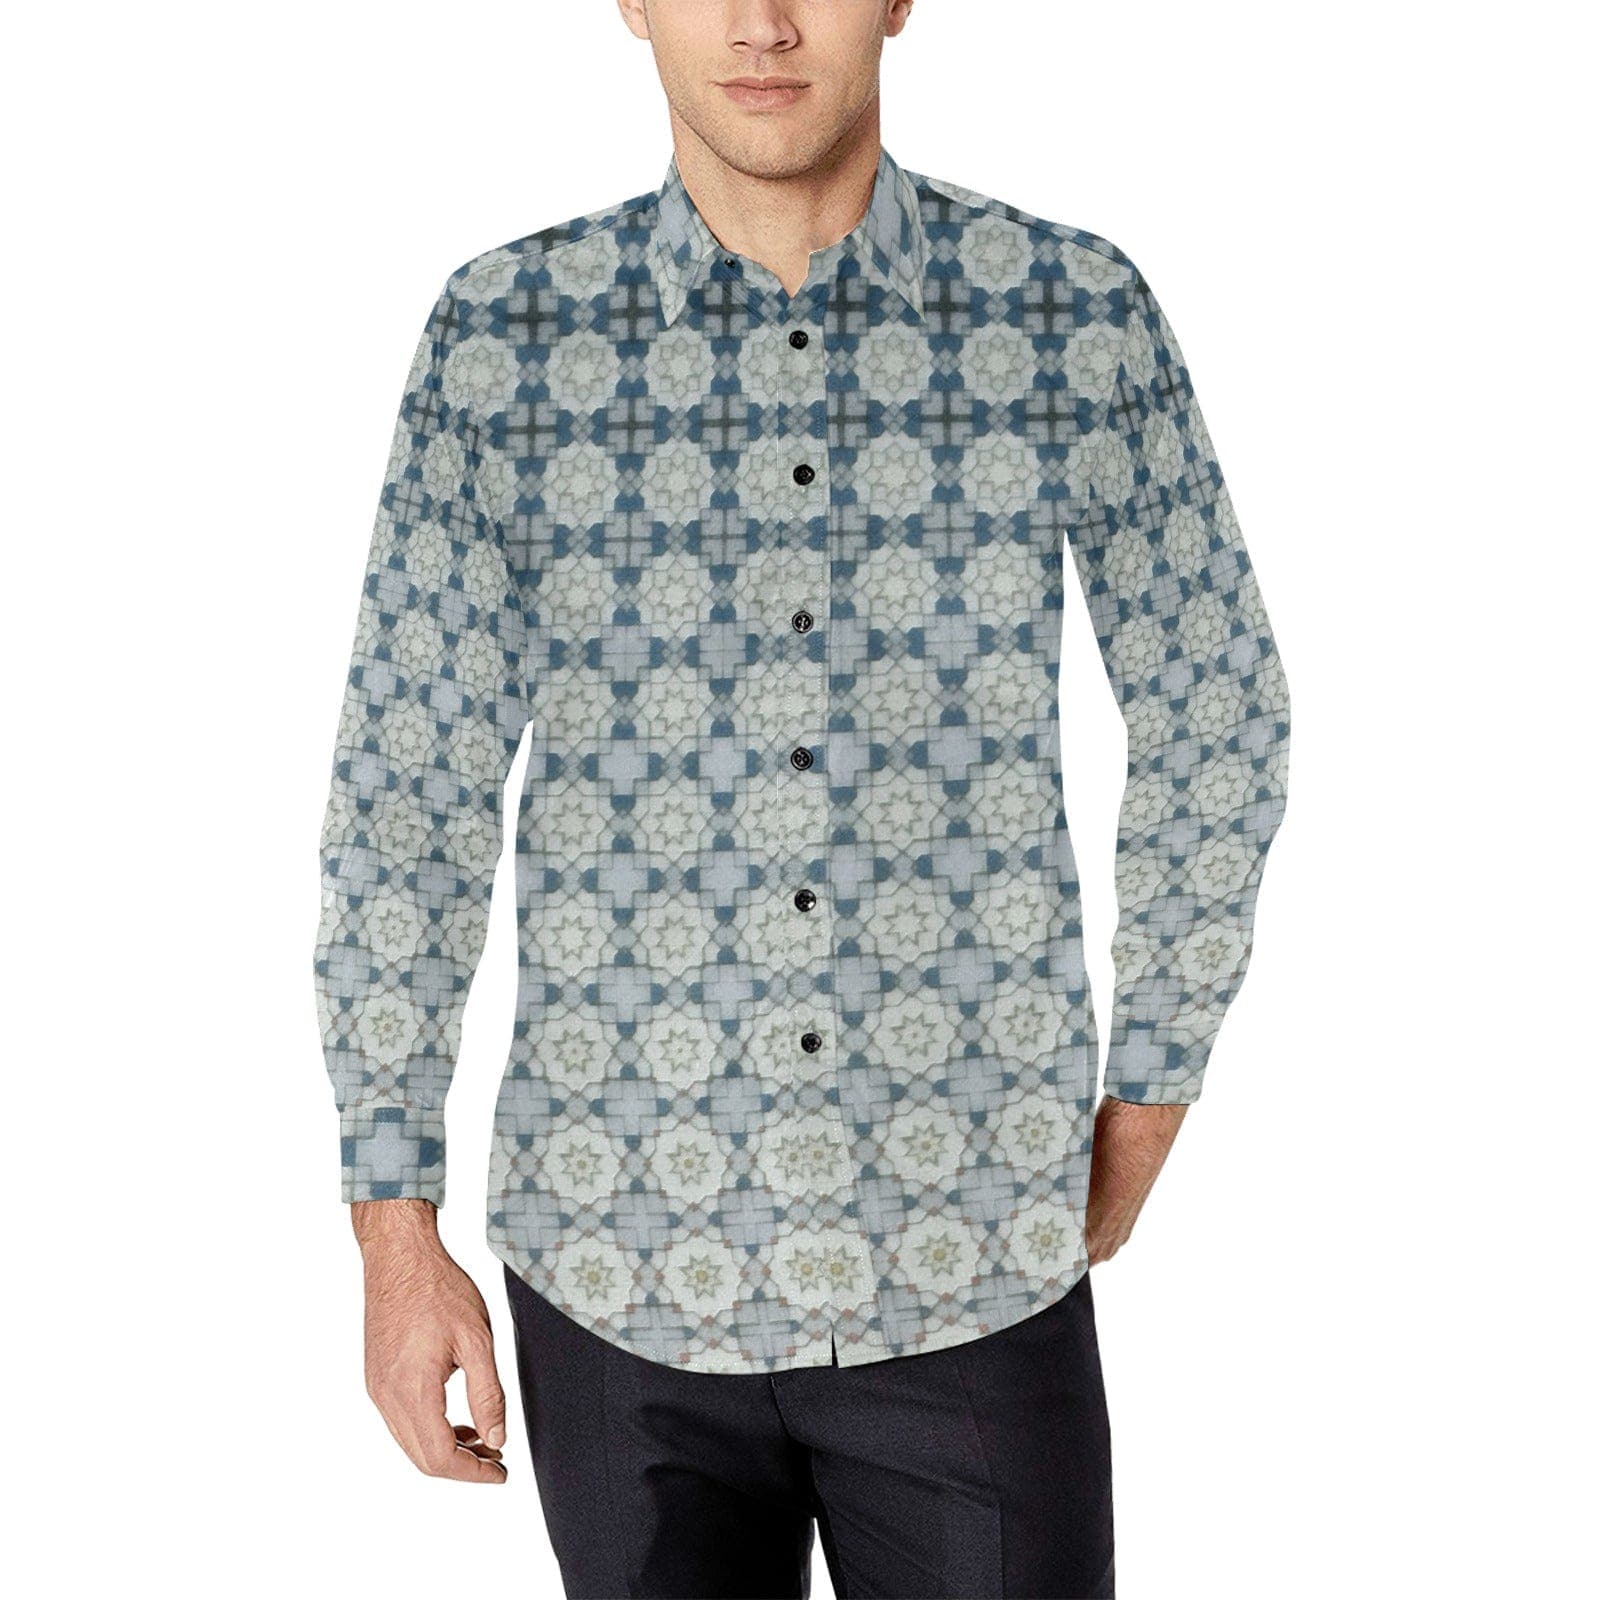 Geometrical Patterned Shirt for Men Long Sleeve Shirt (Without Pocket)